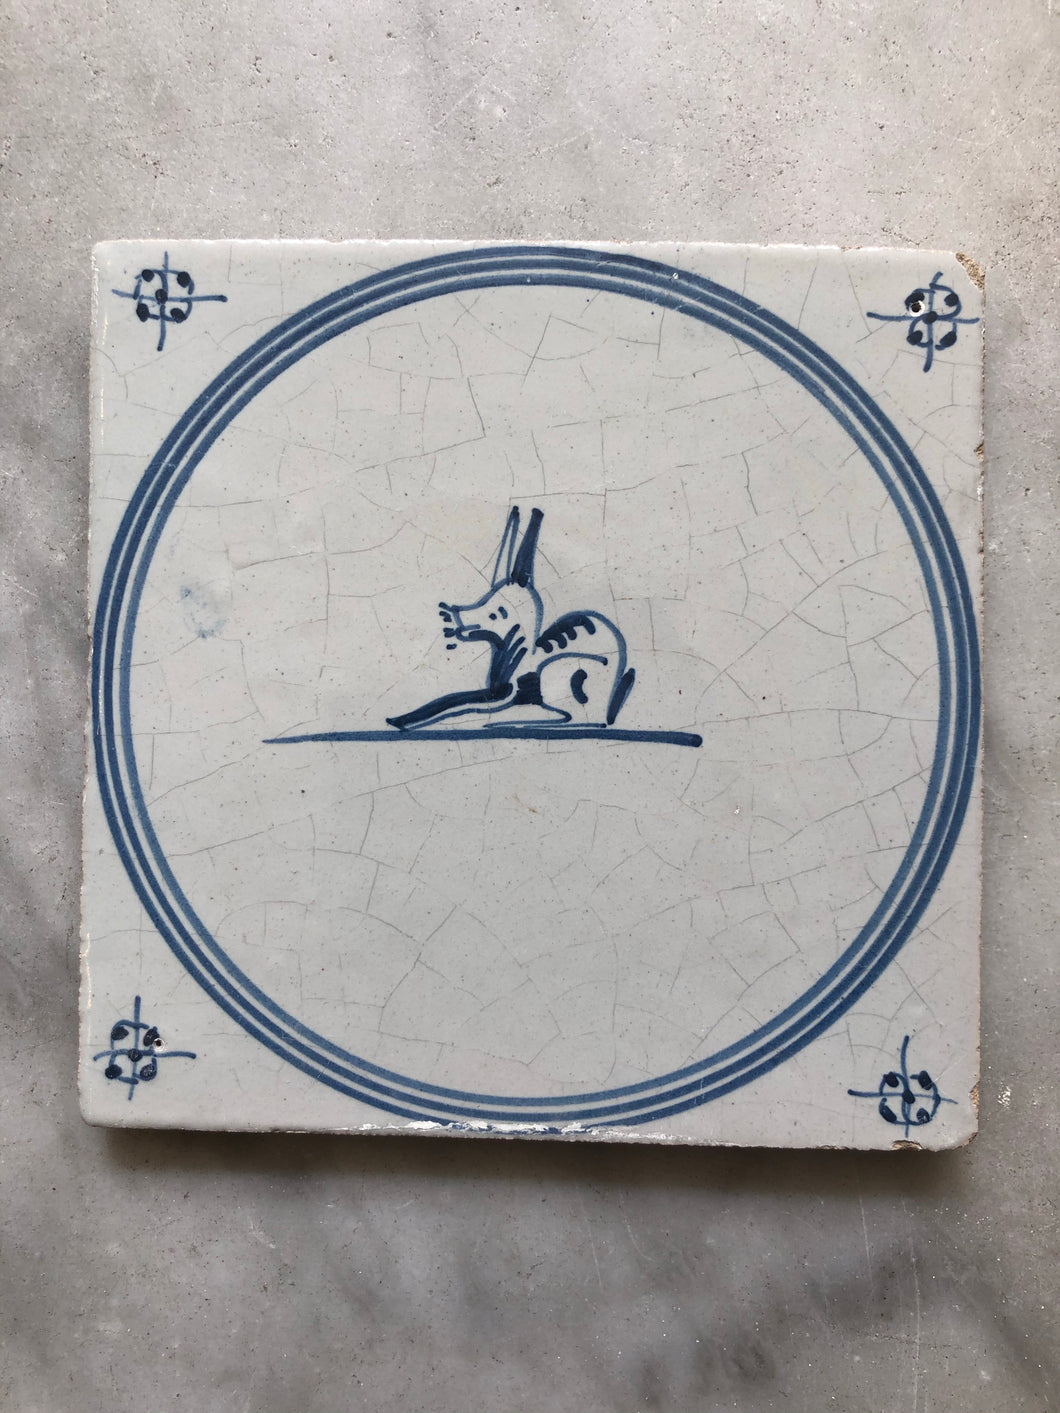 Late 18th century Delft handpainted tile with rabbit, around 1790